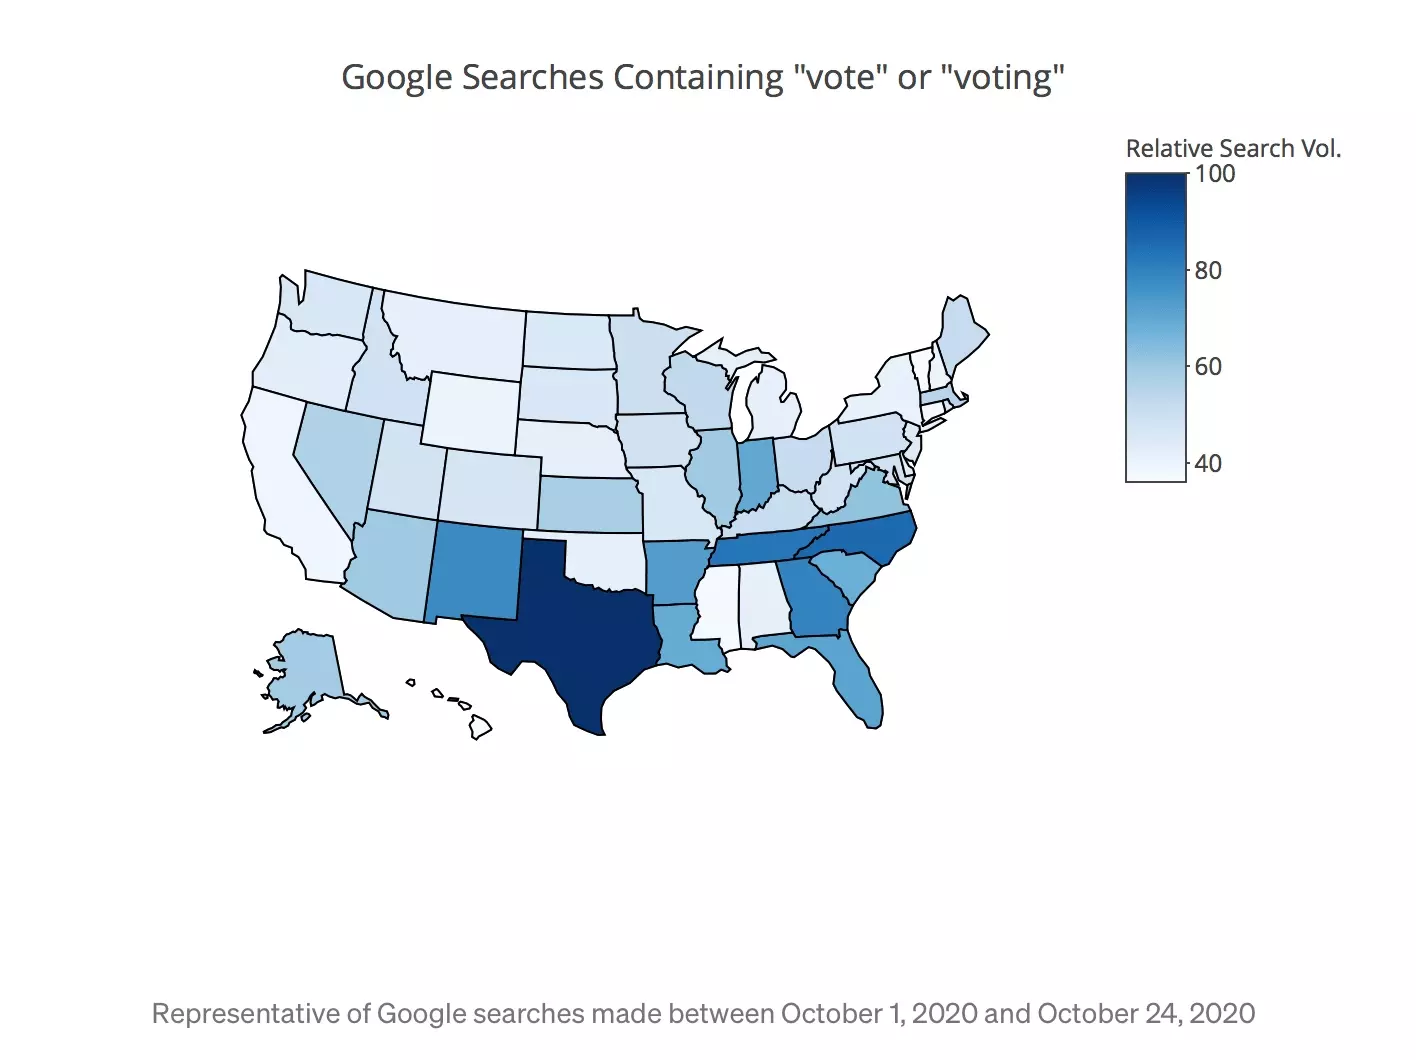 Google_Searches_Containing_Vote.jpg